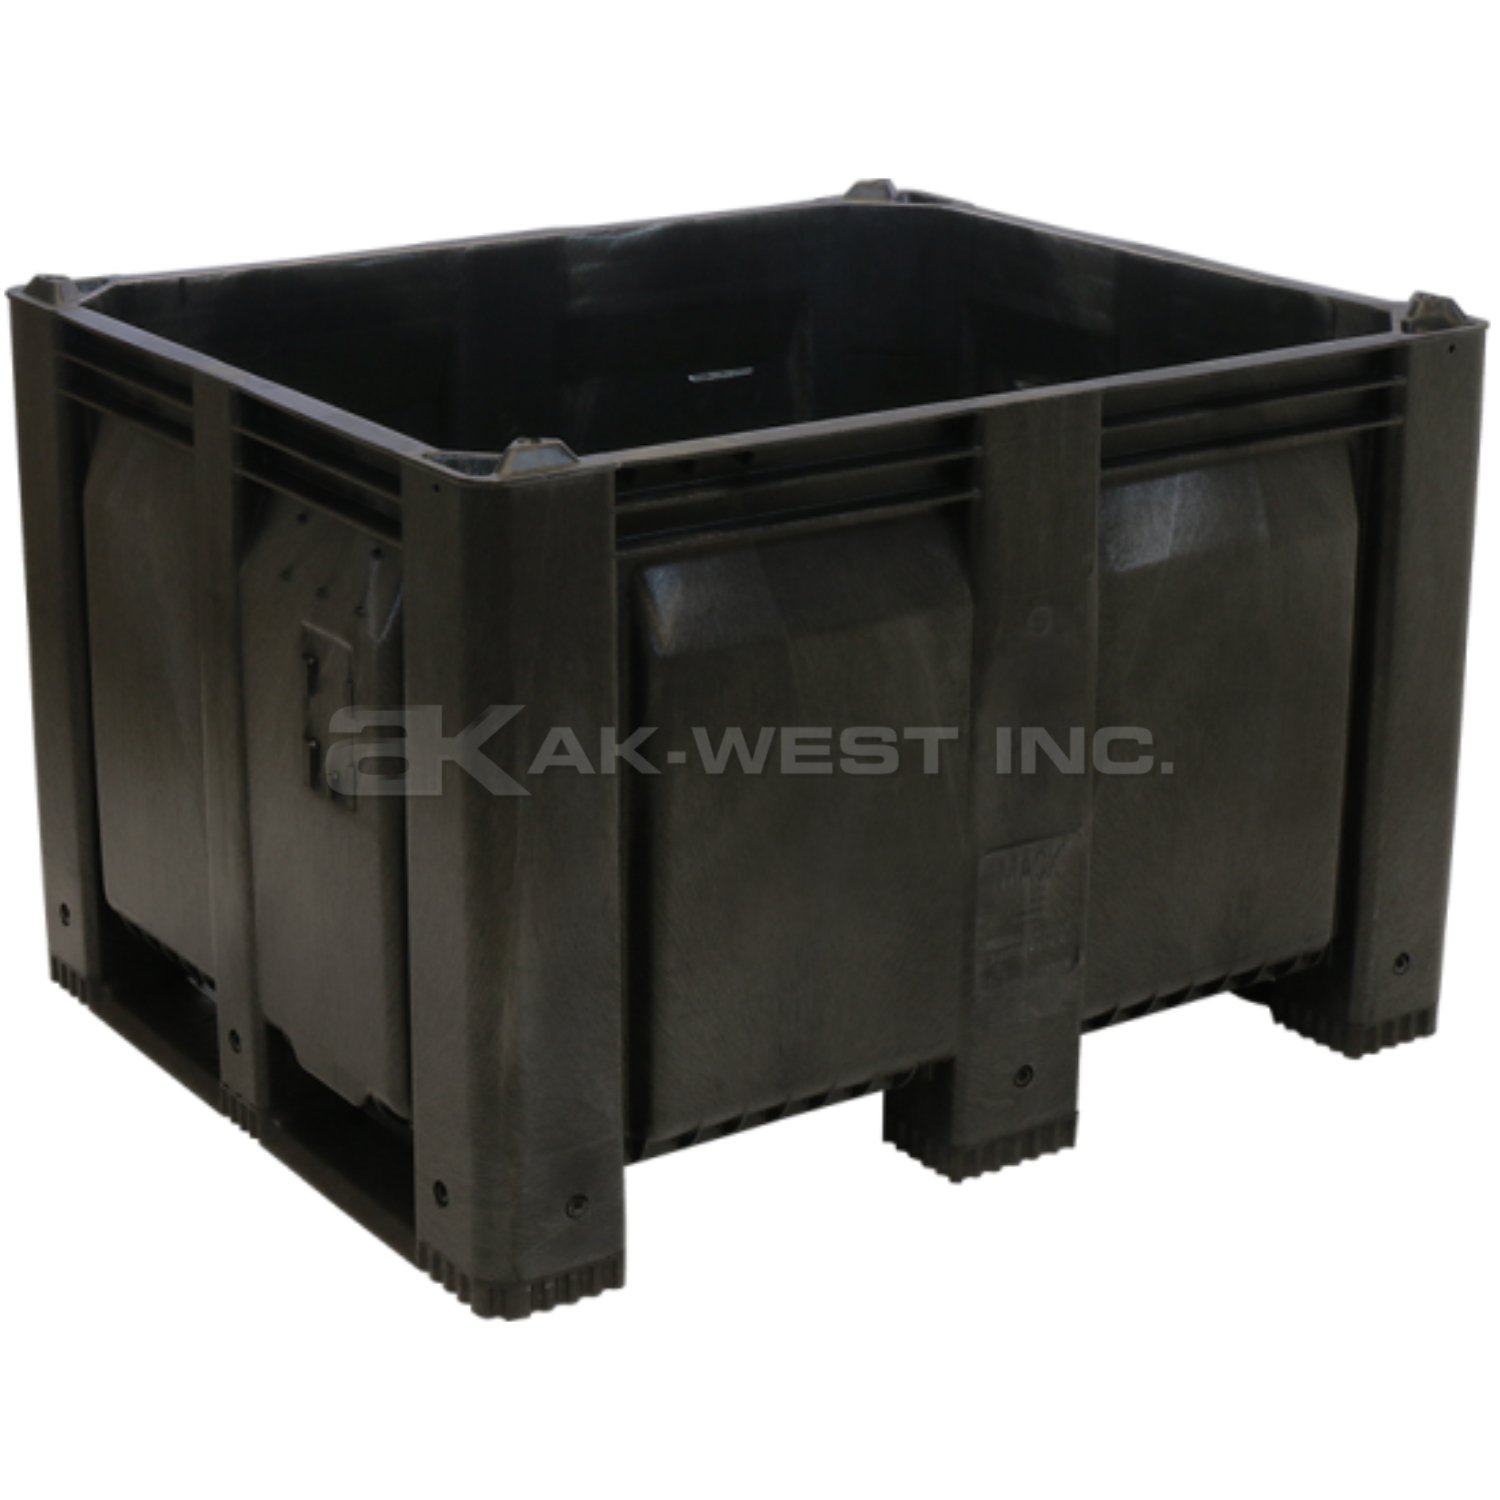 Black, 48"L x 40"W x 31"H Bulk Container w/ Solid Sides, Short Side Runners